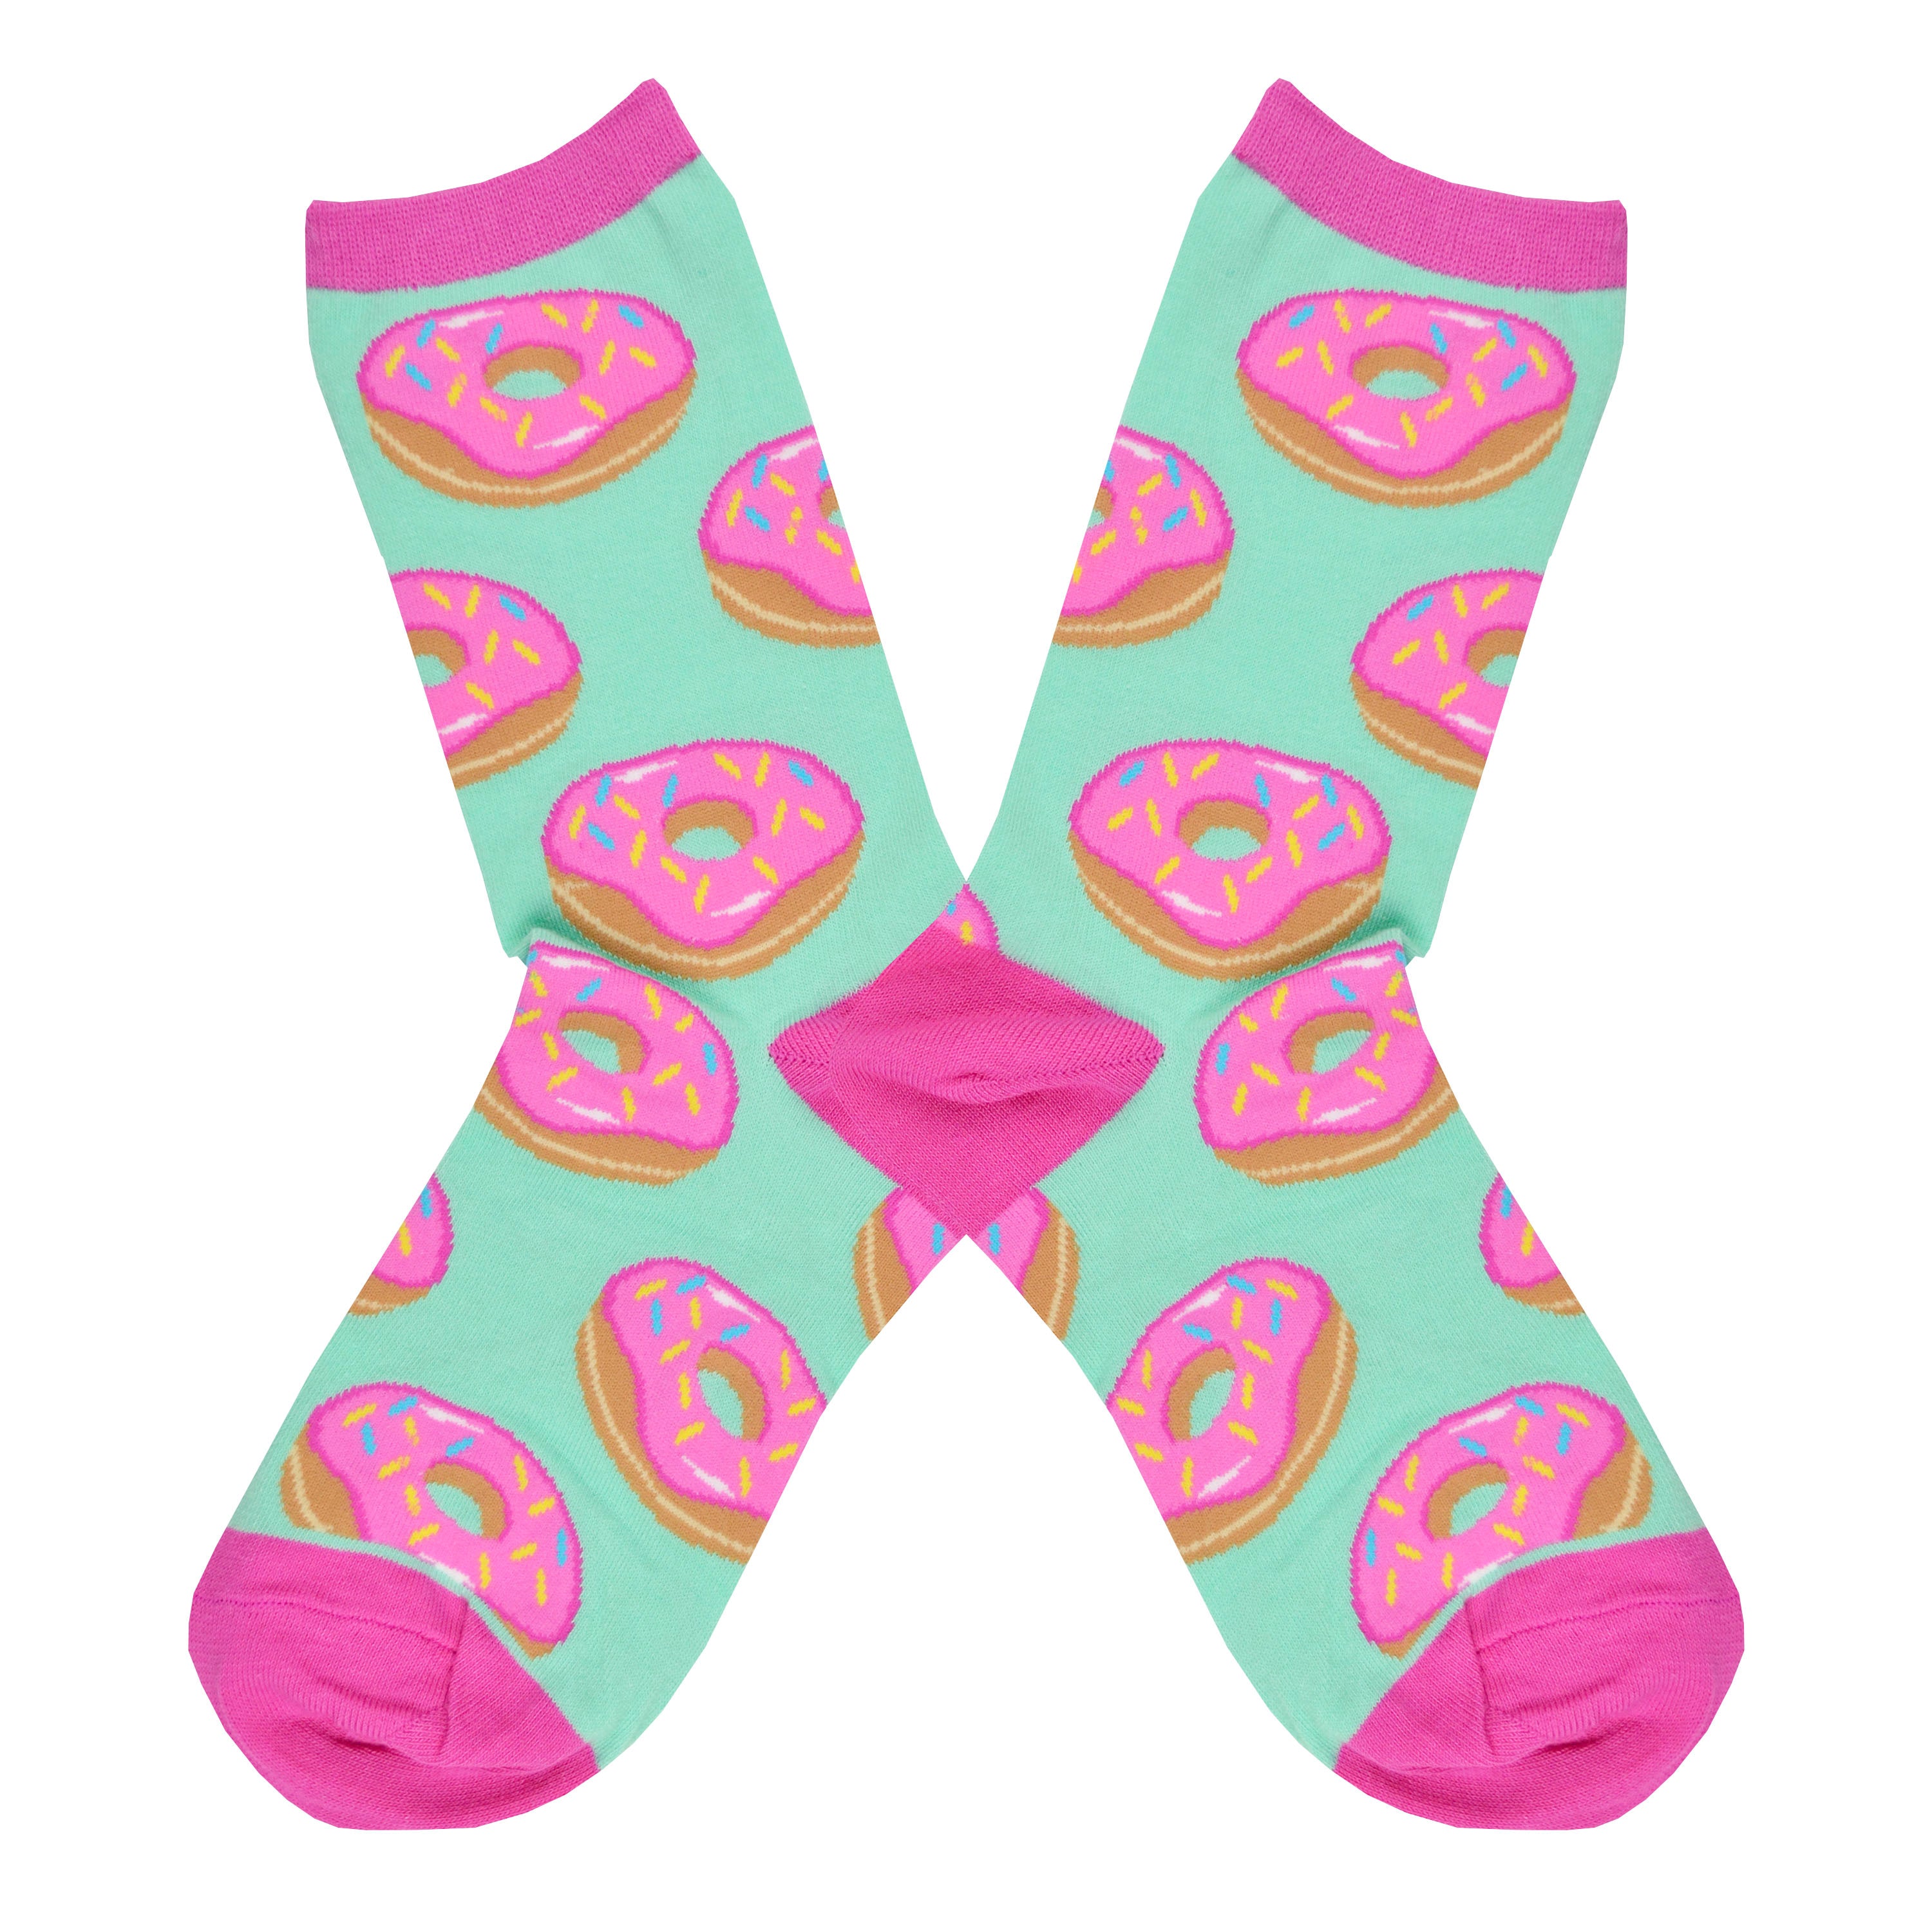 Shown in a flatlay, a pair of women's Socksmith brand cotton crew socks in seafoam green with a hot pink heel, toe, and cuff. The sock has an all over motif of pink frosted donuts.